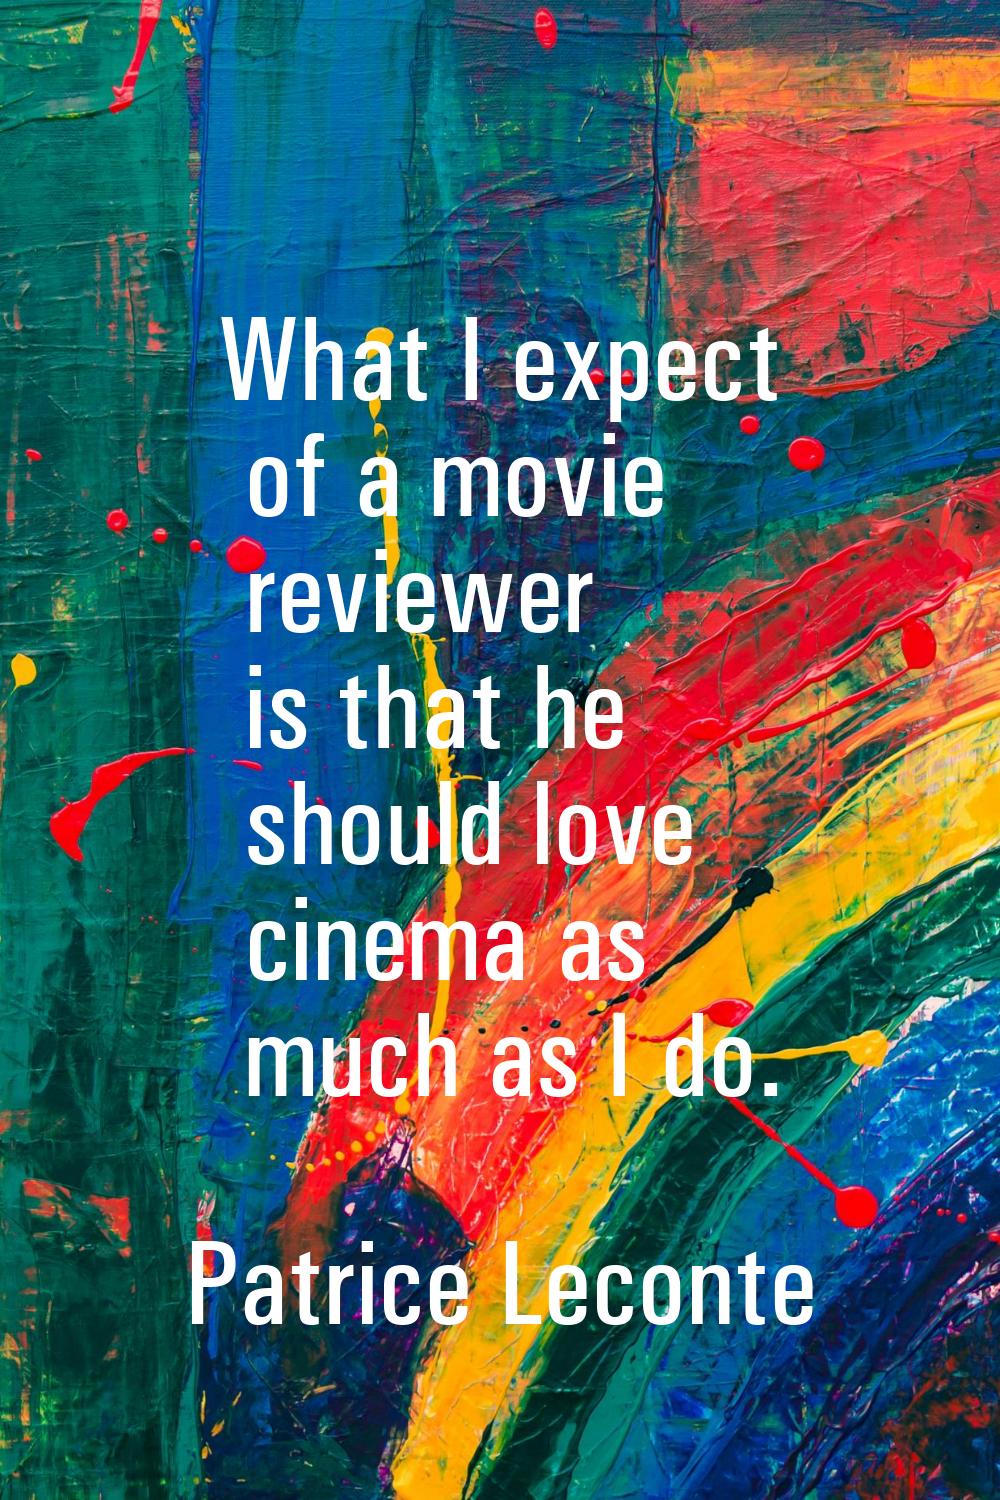 What I expect of a movie reviewer is that he should love cinema as much as I do.